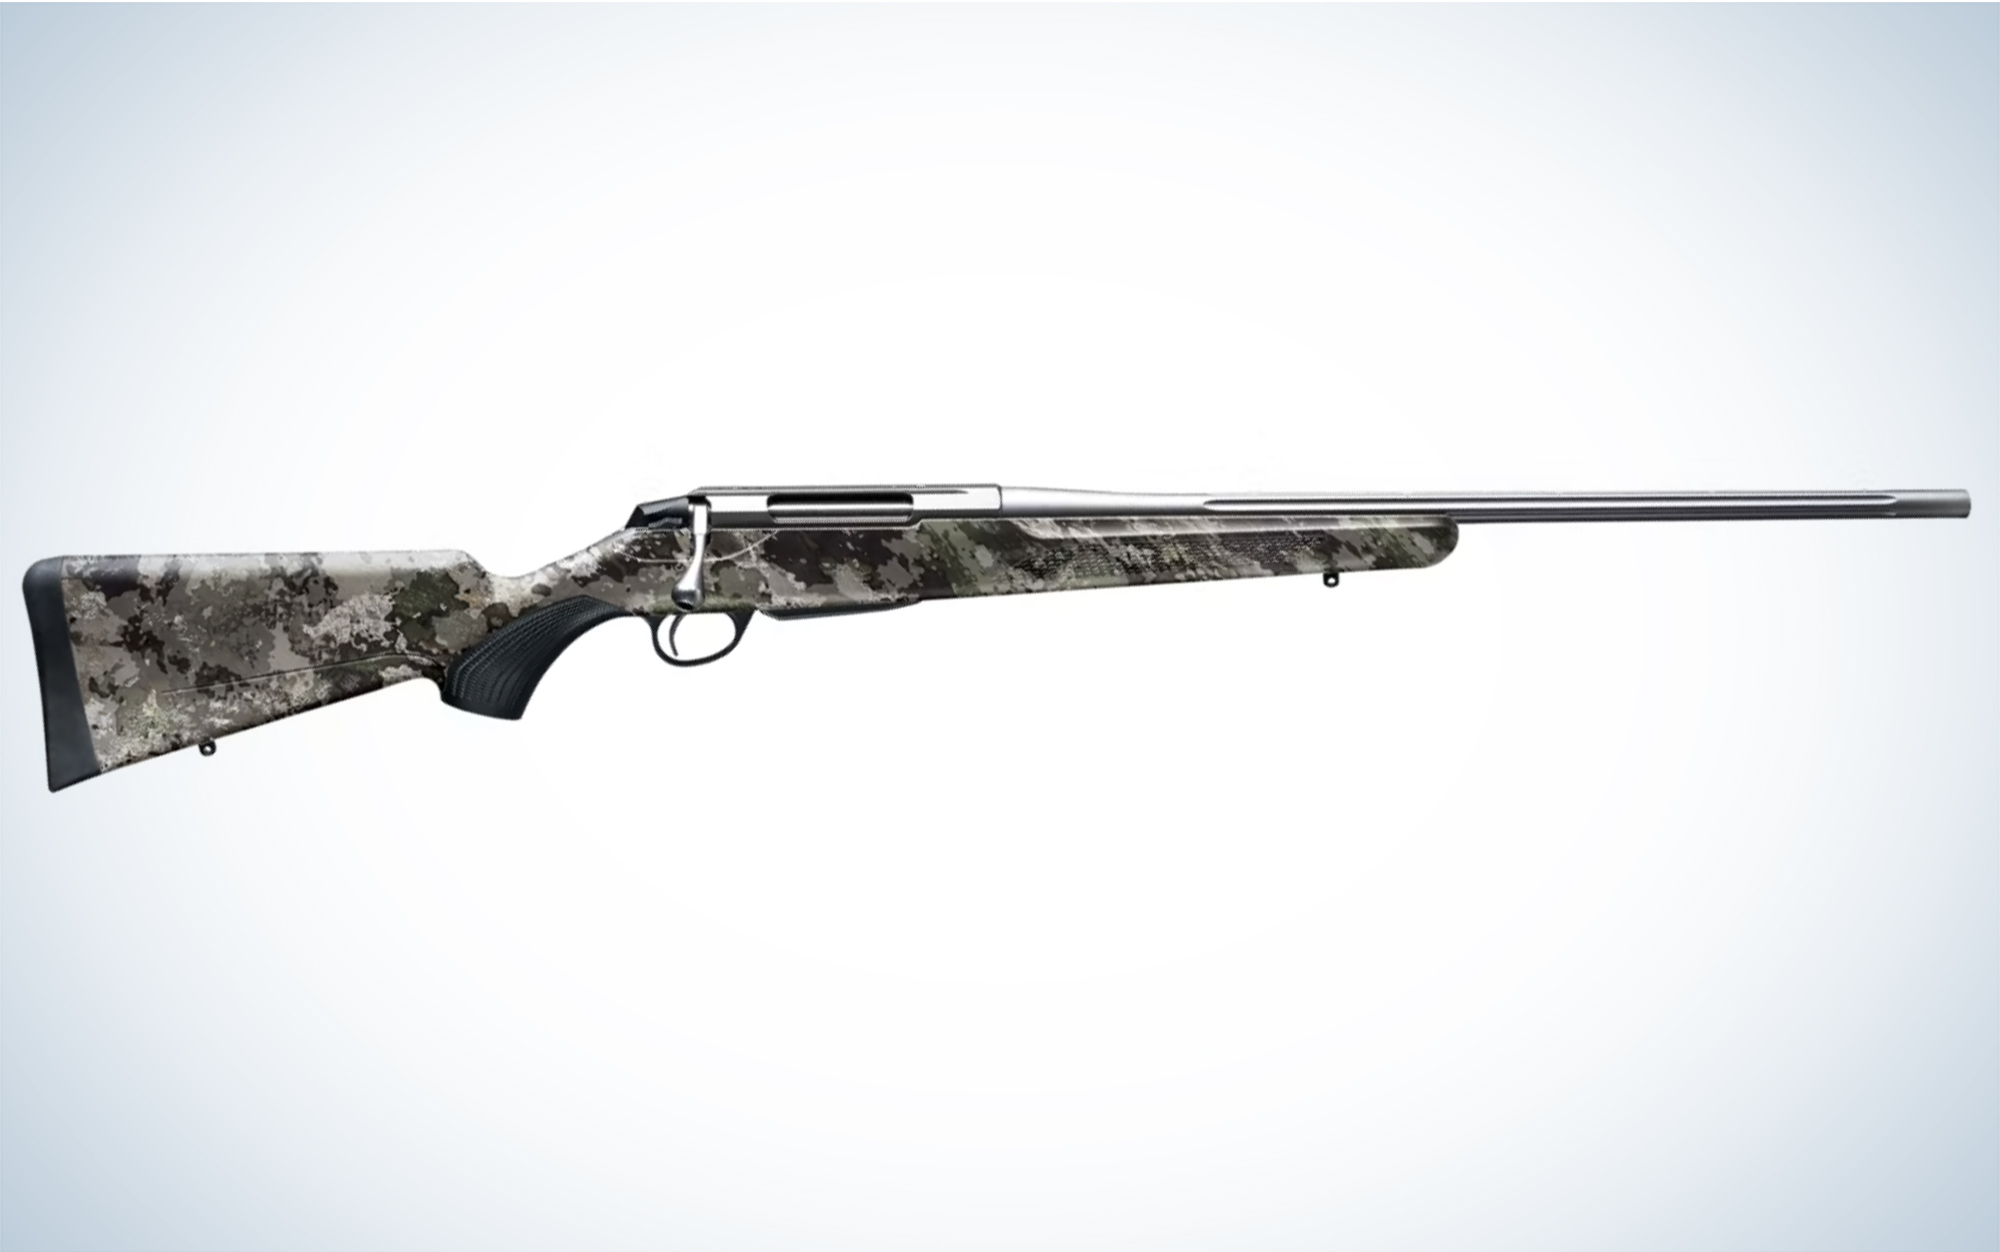 The Tikka T3x Superlite is one of the best rifles for mountain hunts.